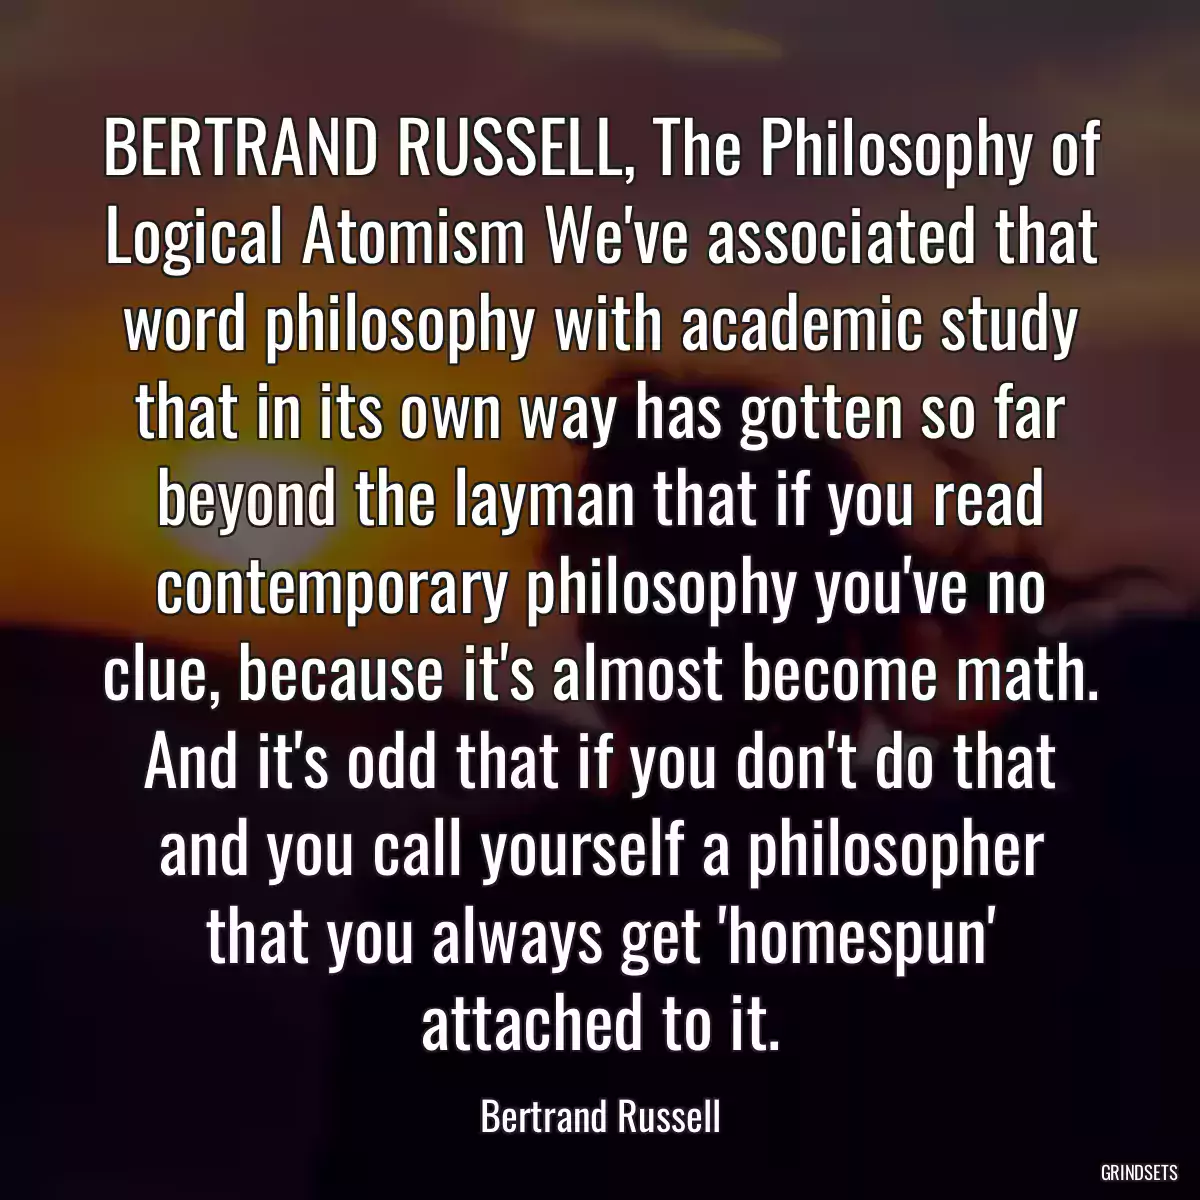 BERTRAND RUSSELL, The Philosophy of Logical Atomism We\'ve associated that word philosophy with academic study that in its own way has gotten so far beyond the layman that if you read contemporary philosophy you\'ve no clue, because it\'s almost become math. And it\'s odd that if you don\'t do that and you call yourself a philosopher that you always get \'homespun\' attached to it.